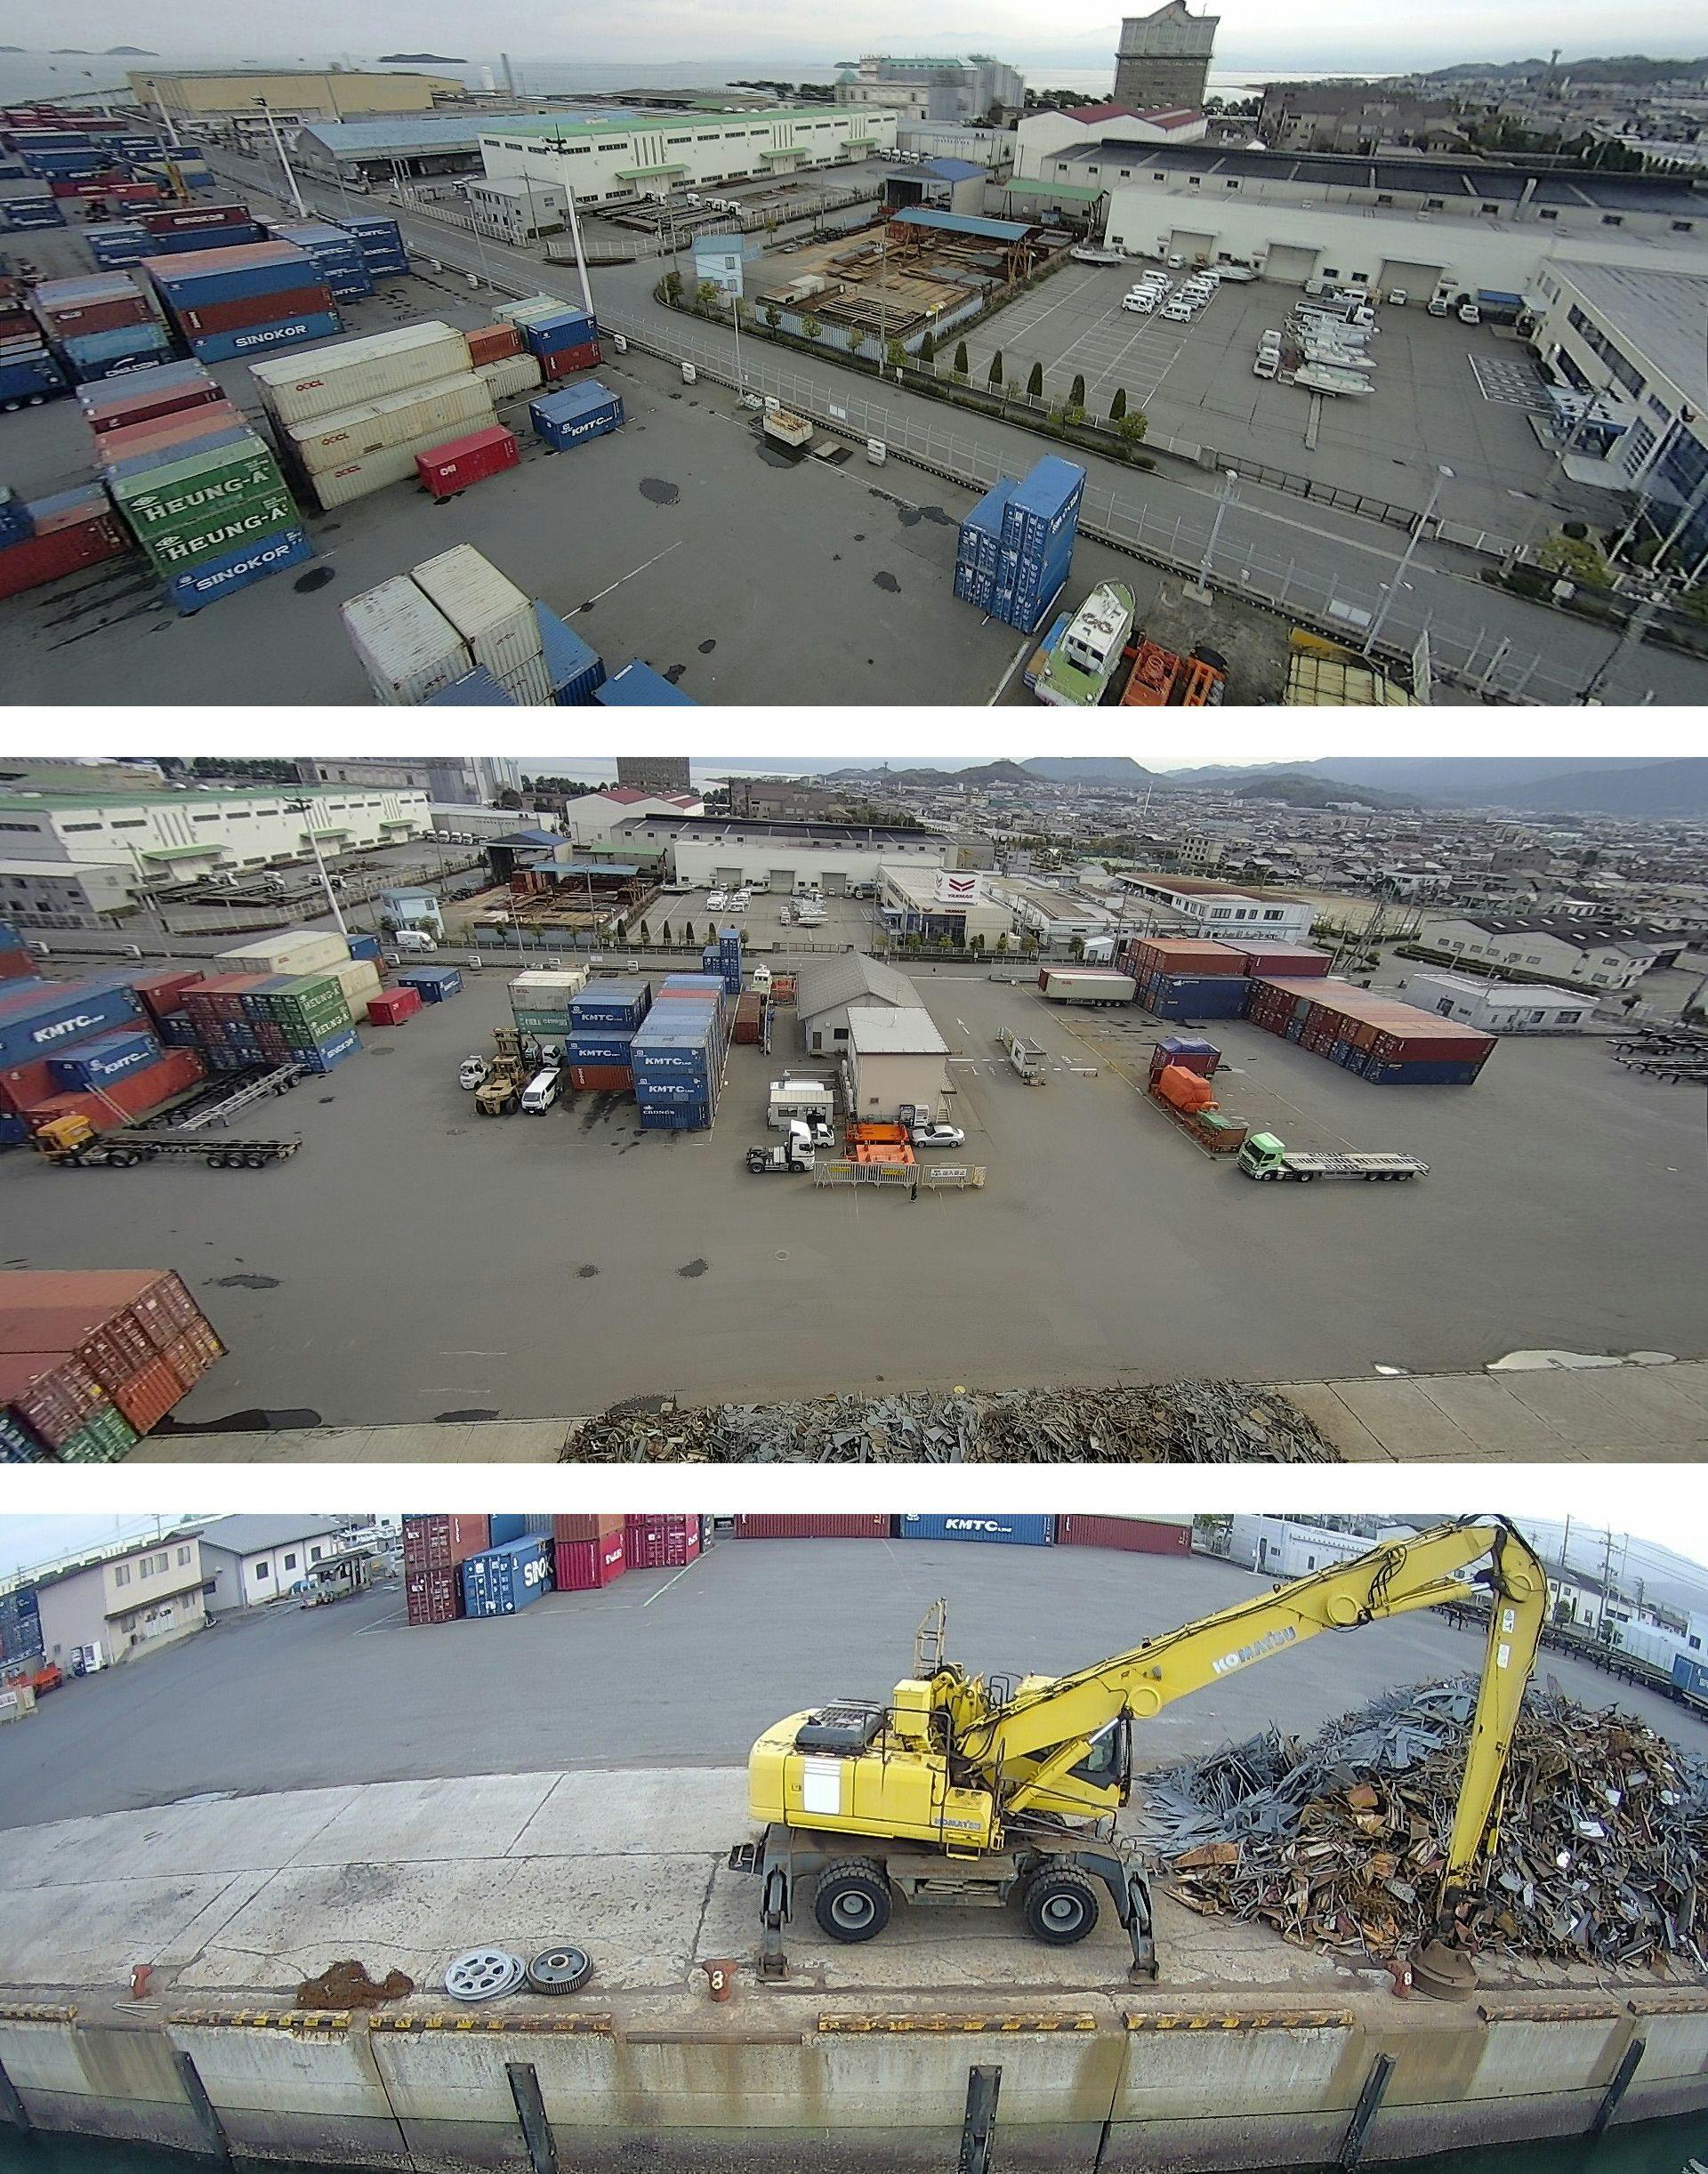 Photos from the Bee of the port operations